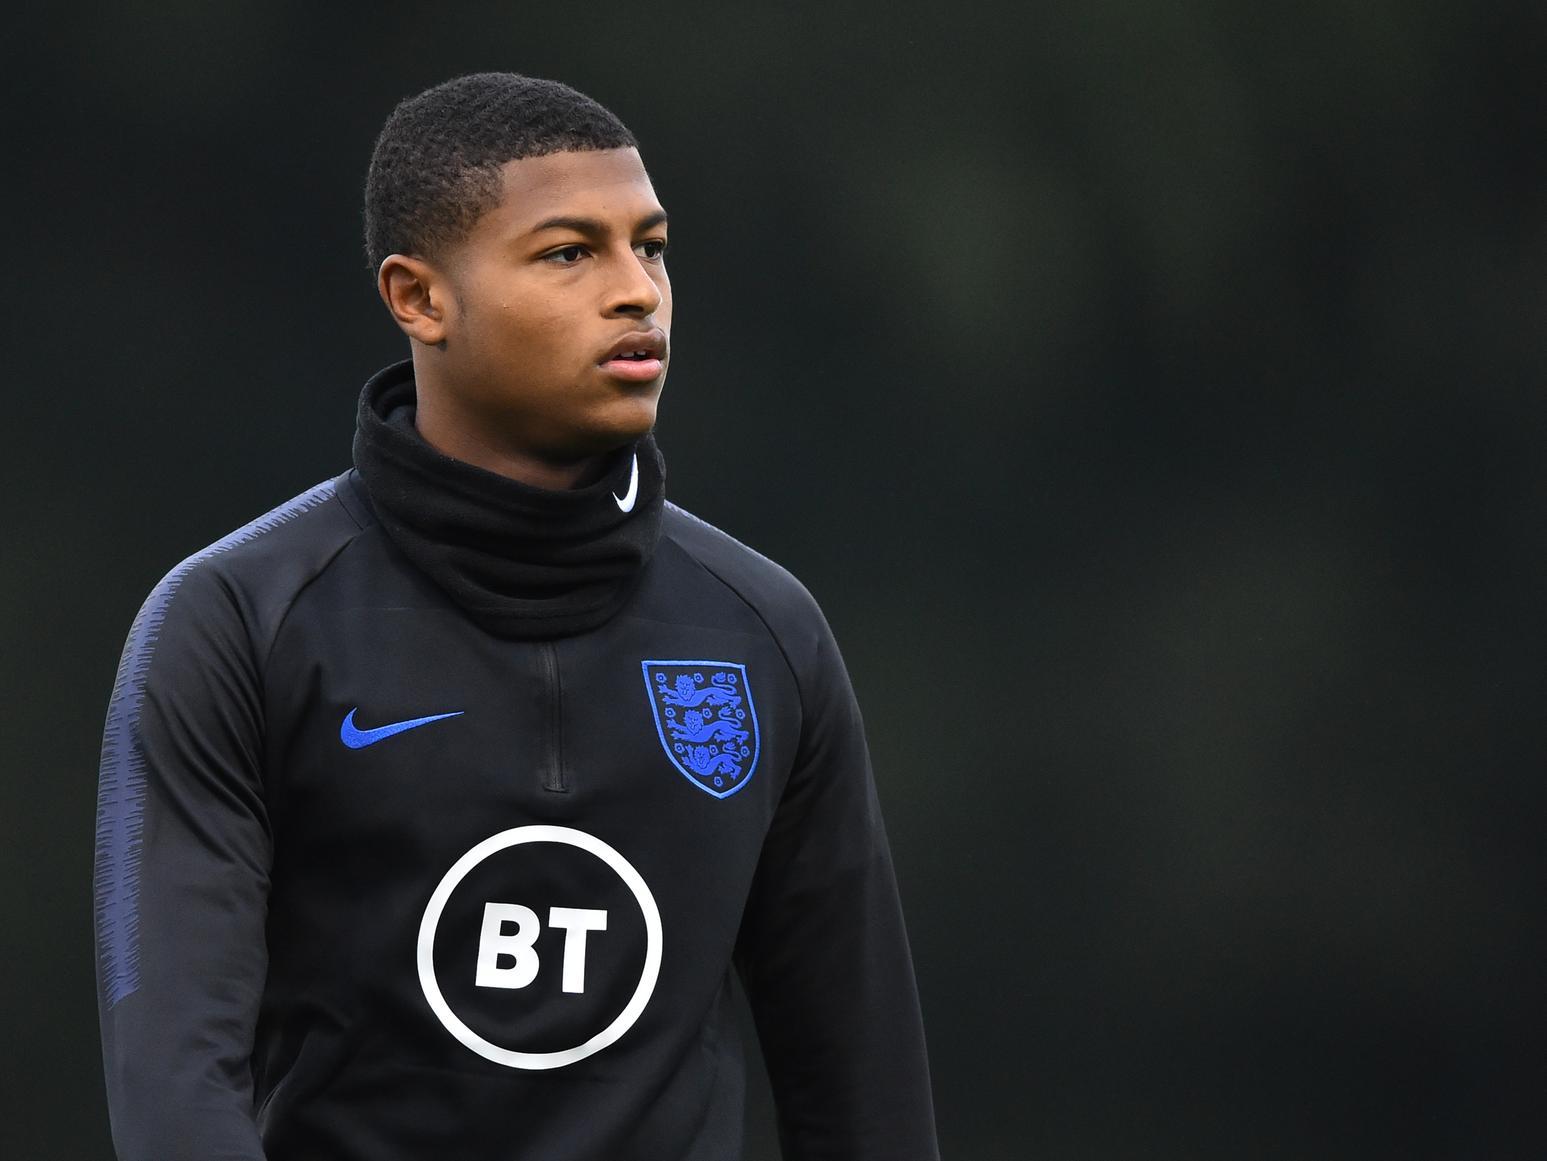 Leeds United look set to miss out on signing Liverpool's Rhian Brewster on loan, as the player looks likely to join Swansea City on a half-season deal imminently. (Wales Online)